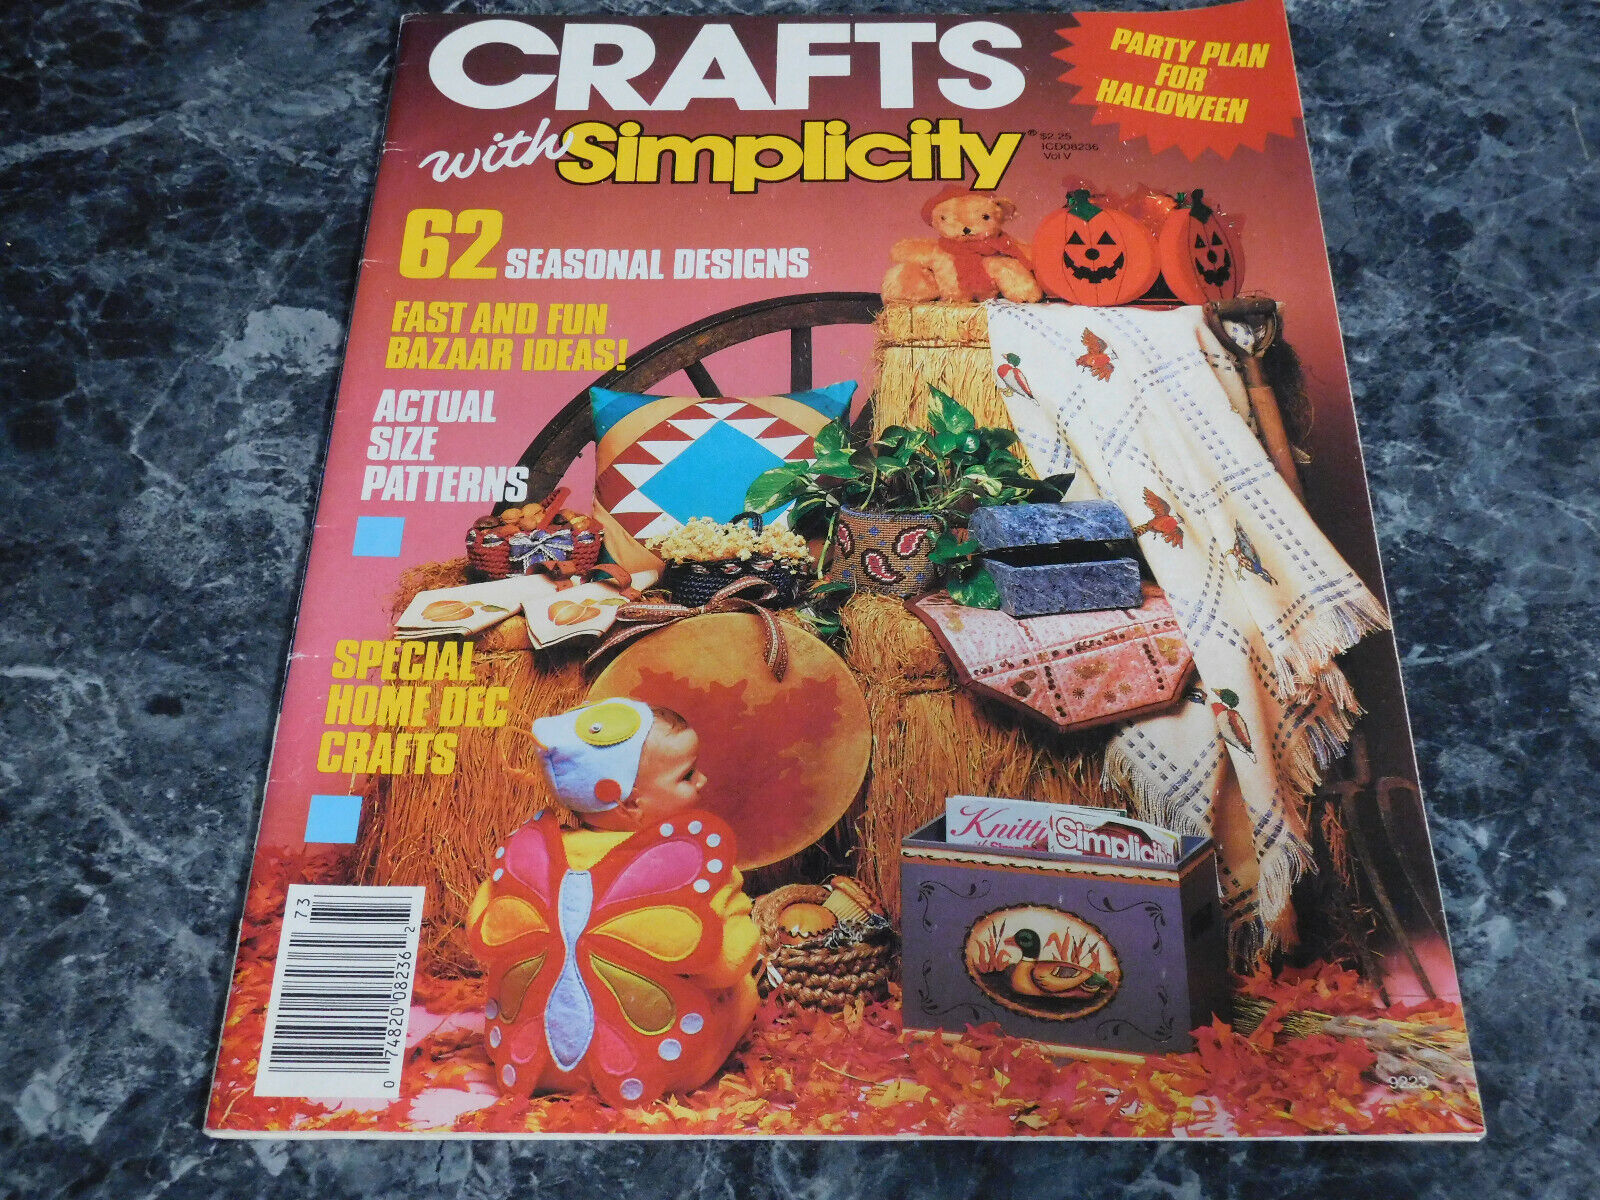 Primary image for Crafts with Simplicity Magazine 1987 Party plan for Halloween